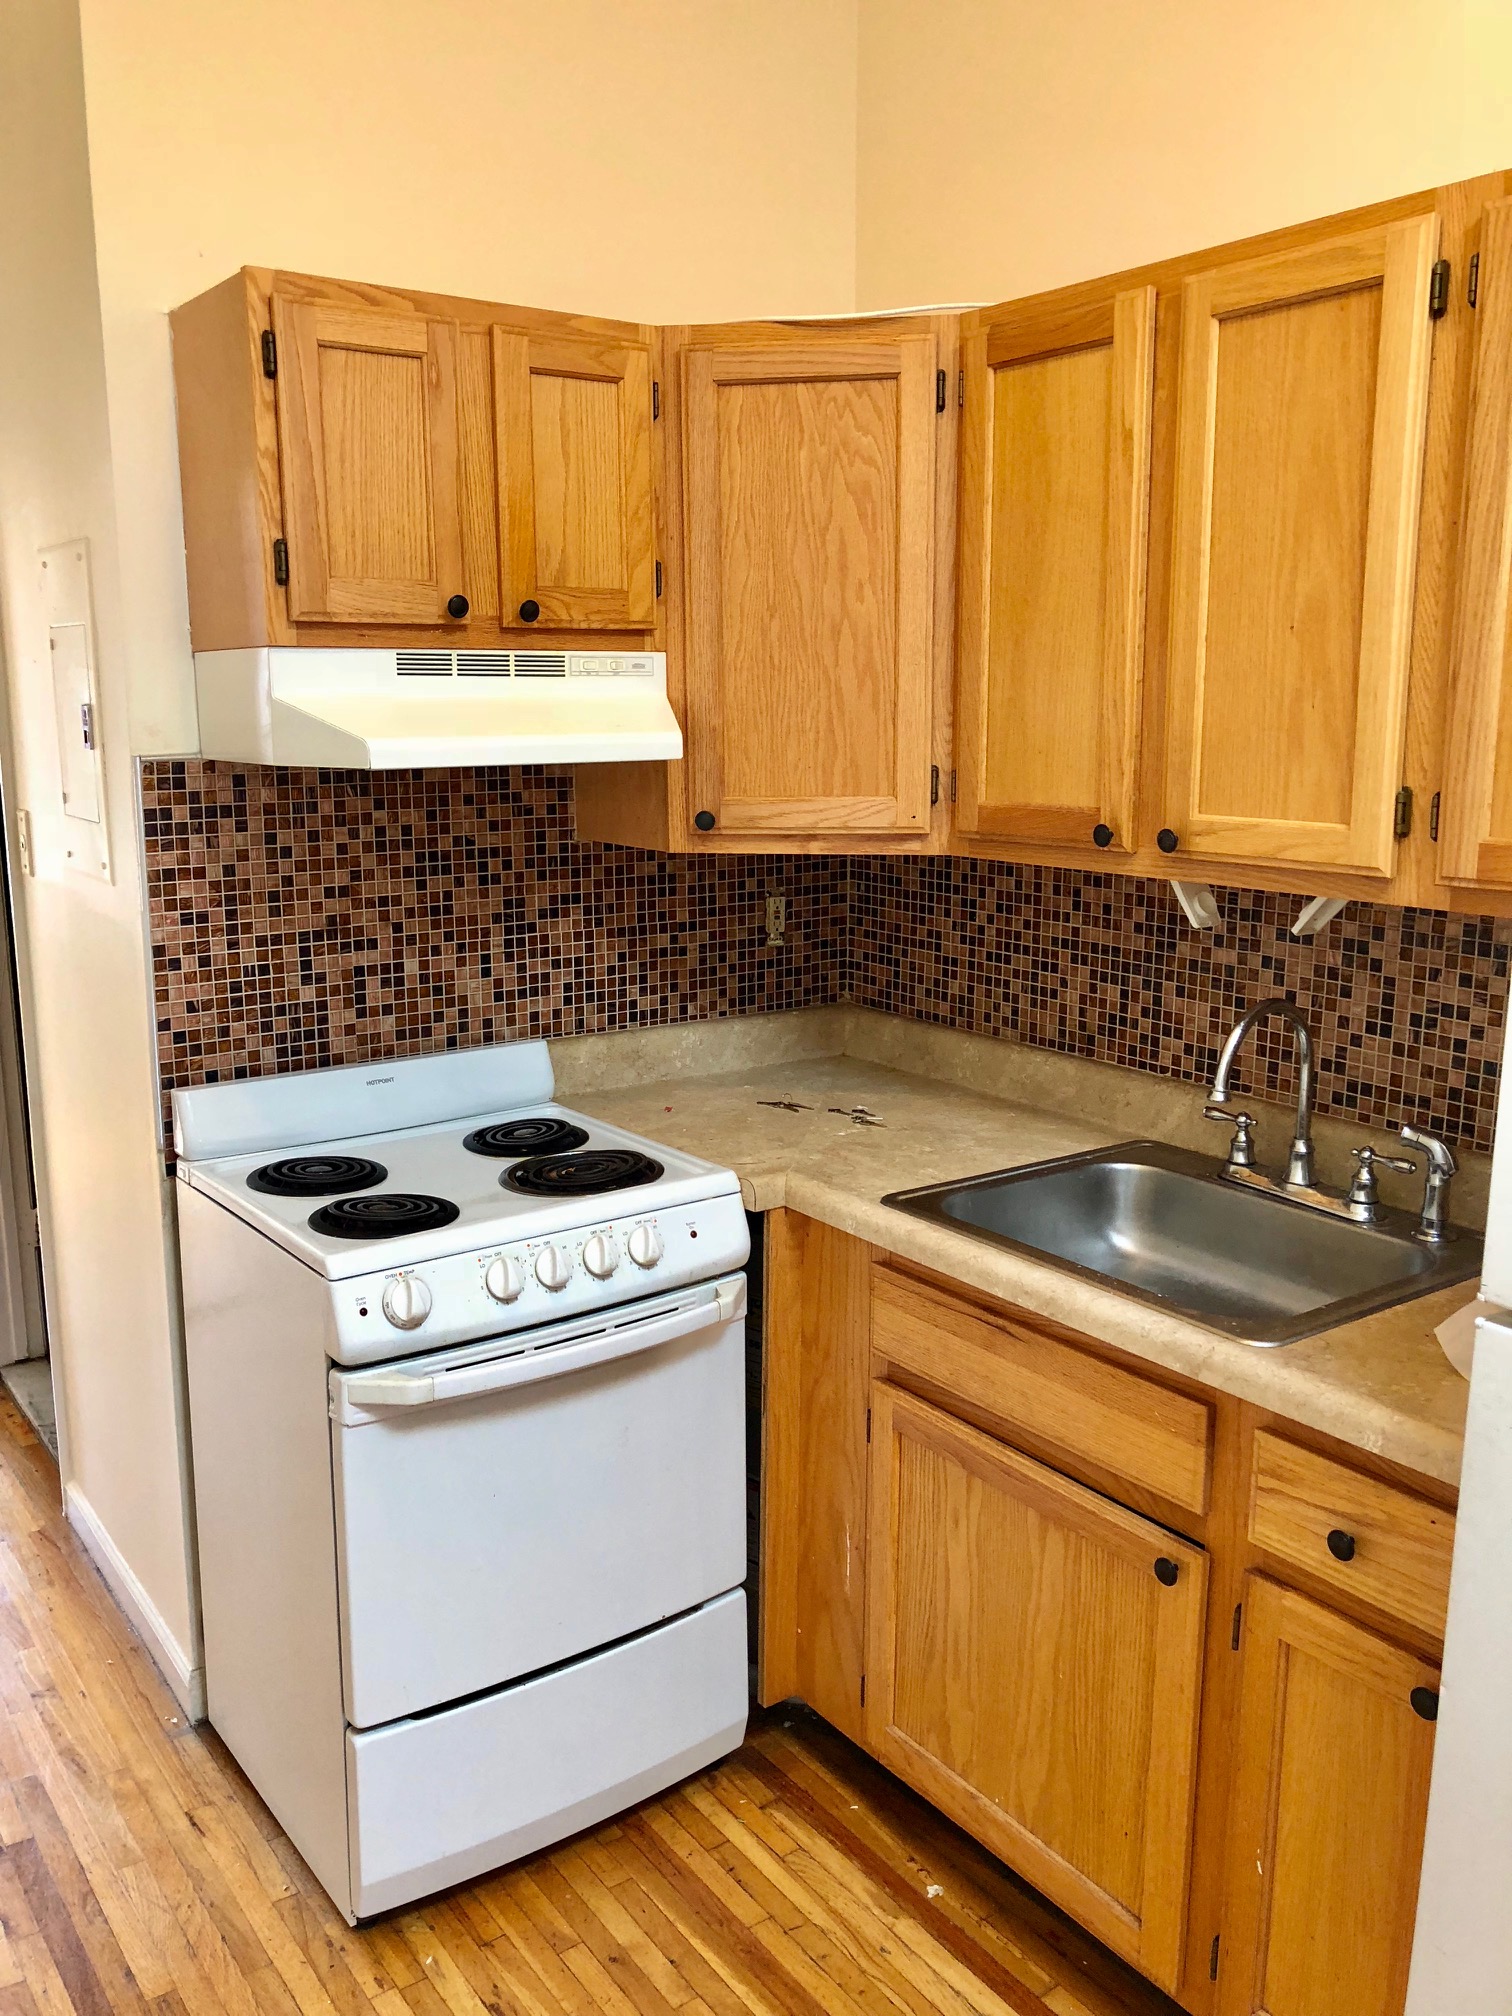 This beautiful apartment features hardwoods floors, beautiful sky light, a great layout and shared laundry on the first floor. This unit can also be used as a two bedroom with limited living room space since both rooms are on either ends of the apartment. A nice boxy 1 bedroom is perfect as well..SORRY NO PETS. Available 10/1. 